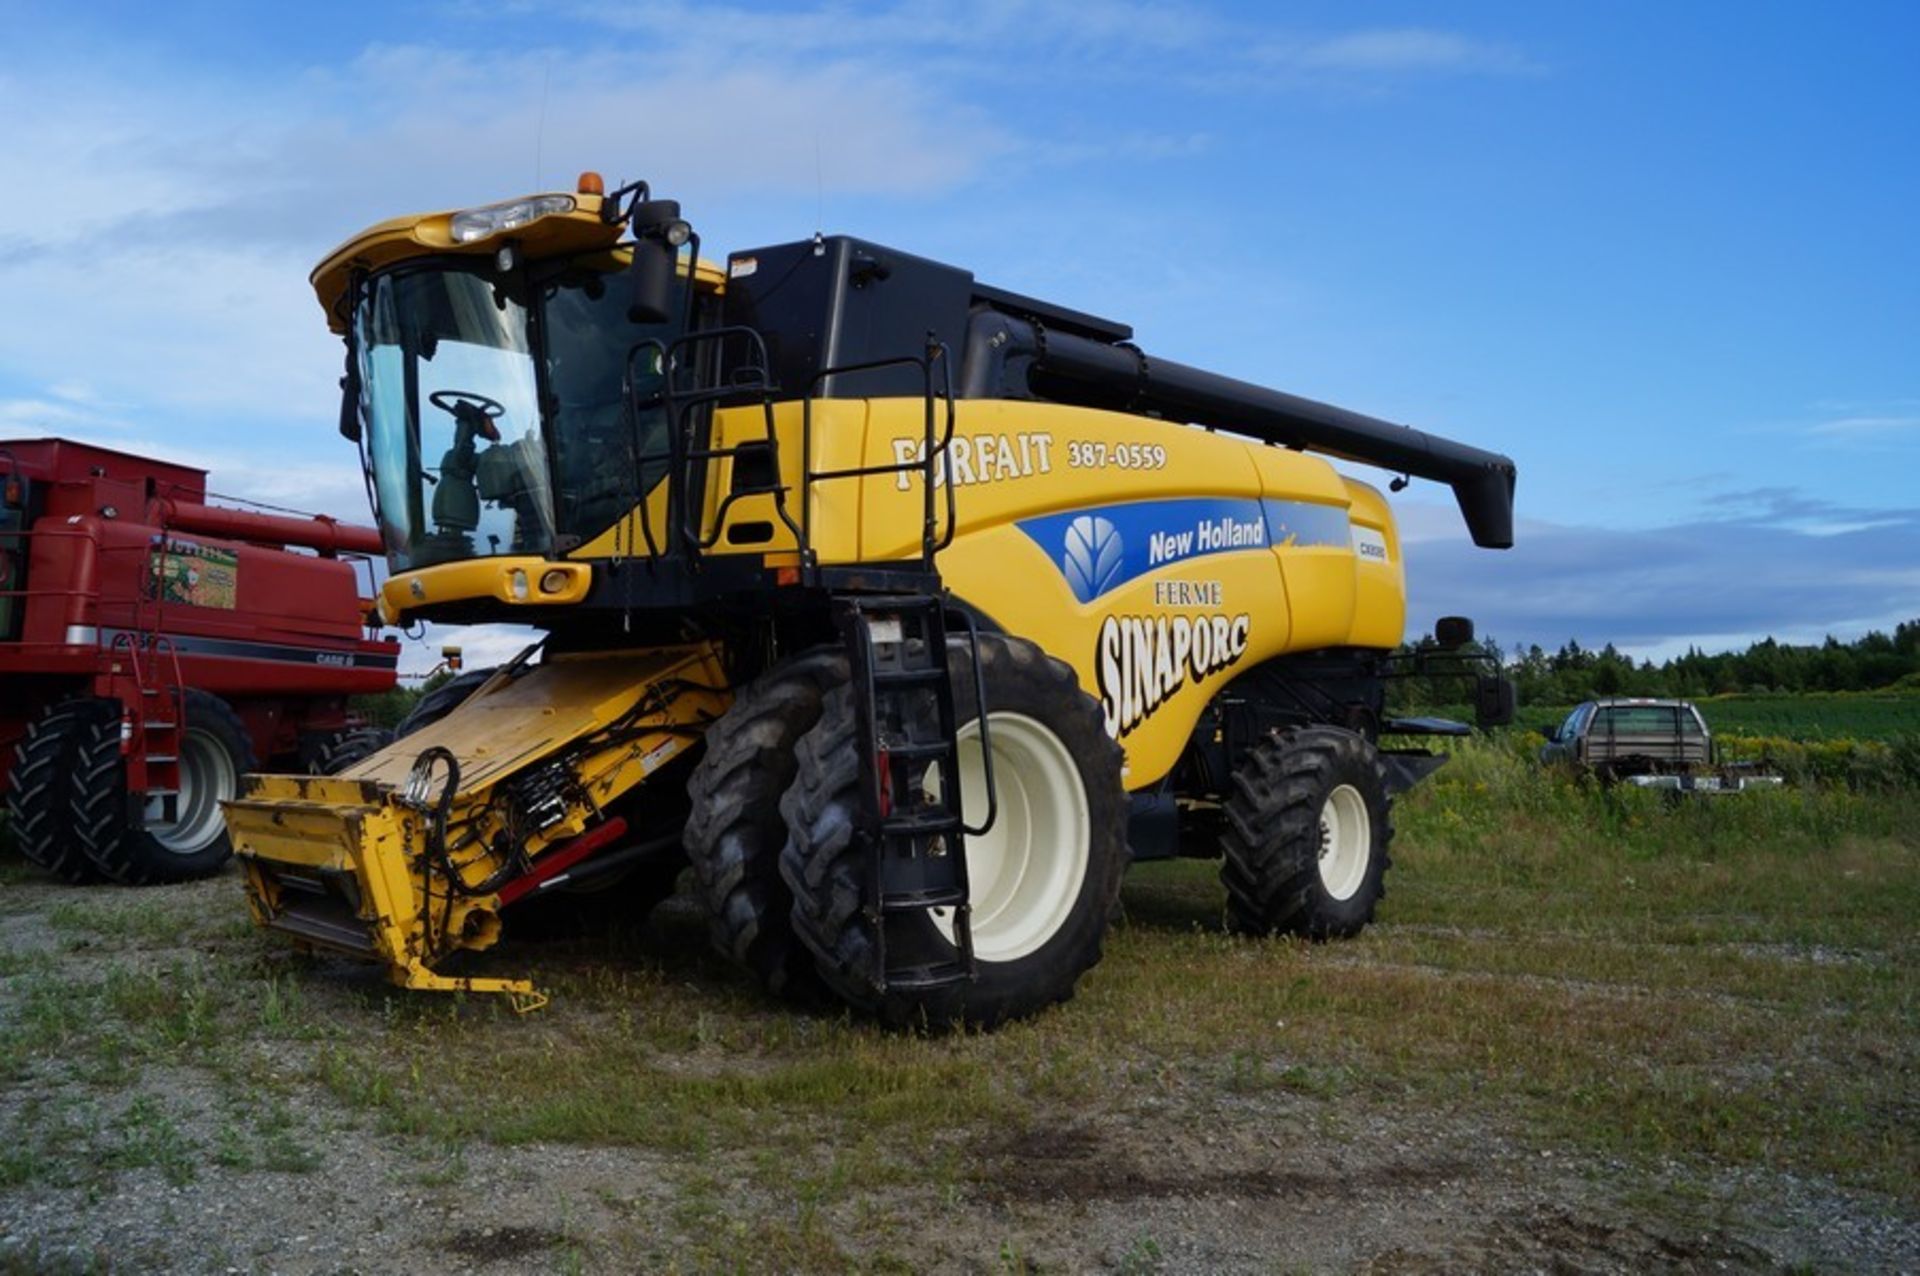 2008 NEW HOLLAND CX8080 Combine Harvester, 4700 Sep.hrs - Image 2 of 24